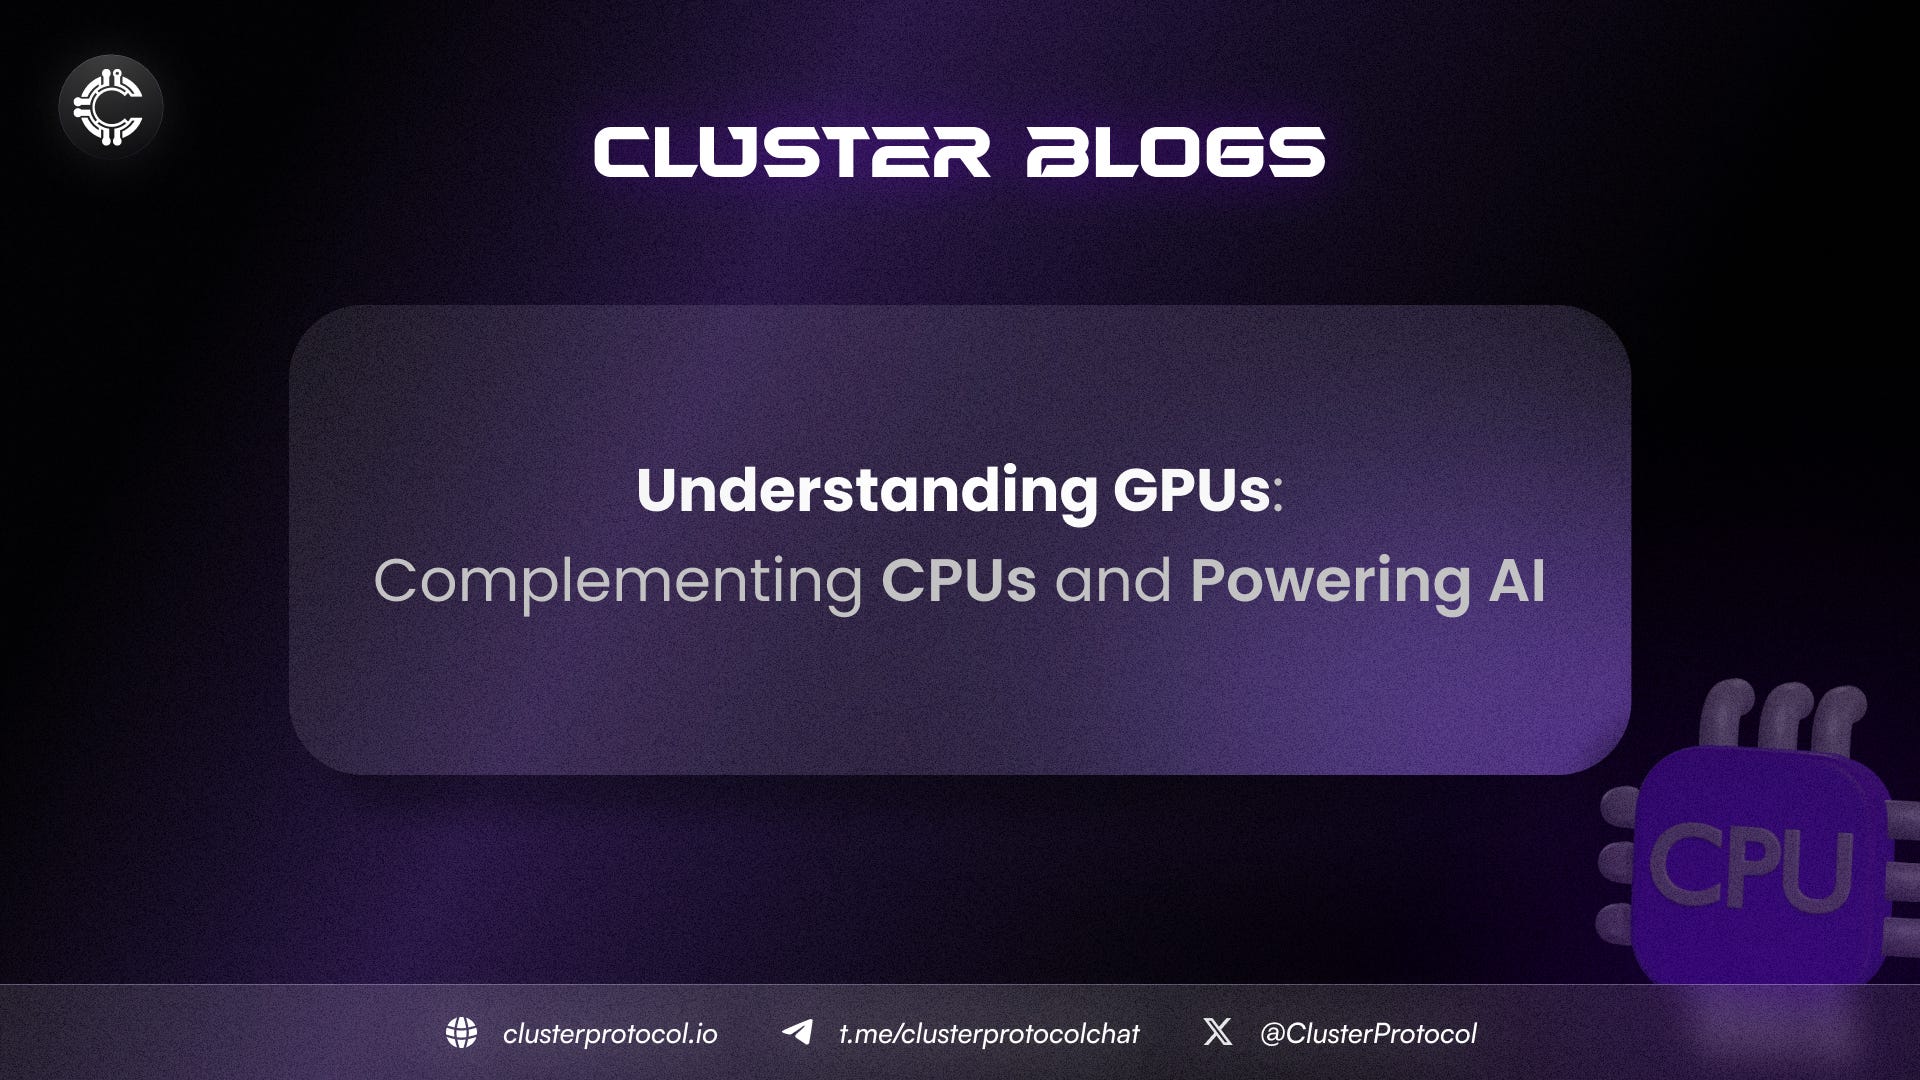  Understanding GPUs: Complementing CPUs and Powering AI